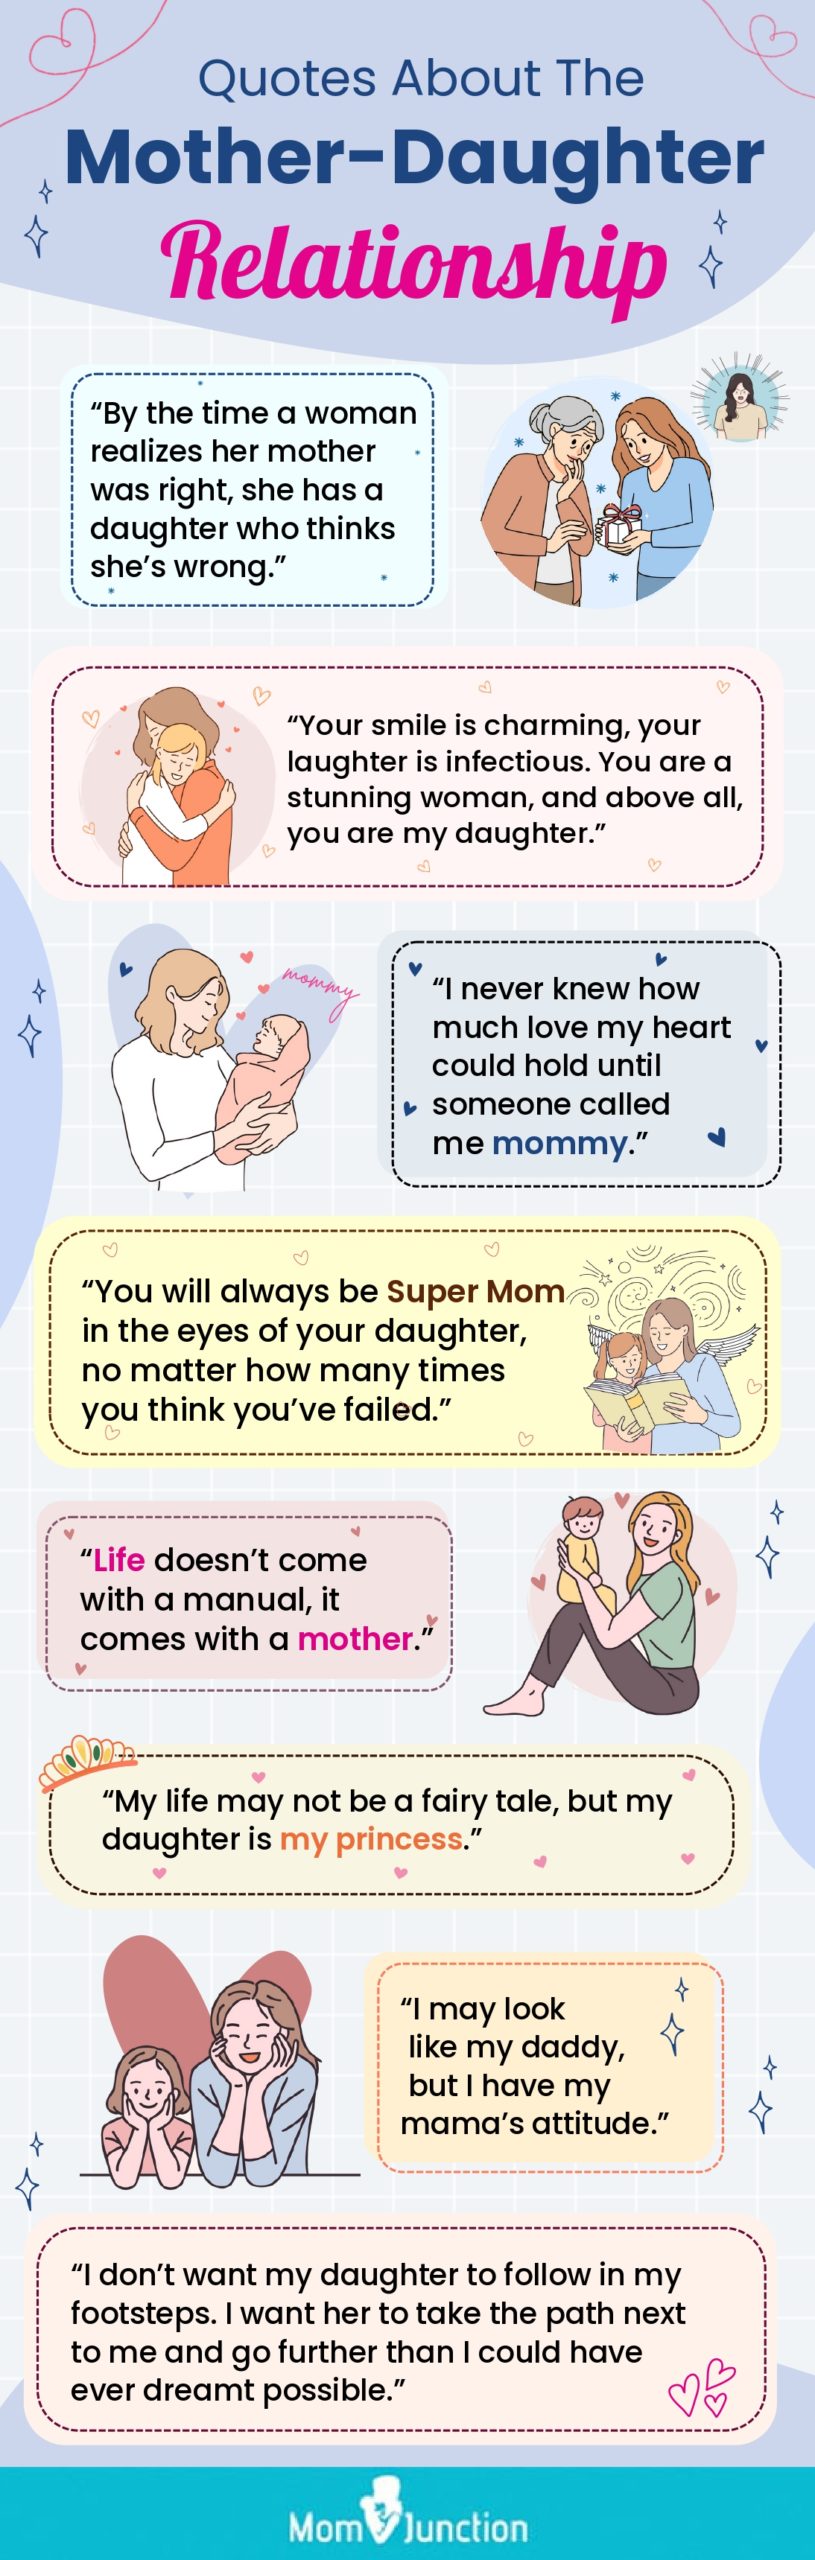 quotes about the mother daughter relationship (infographic)